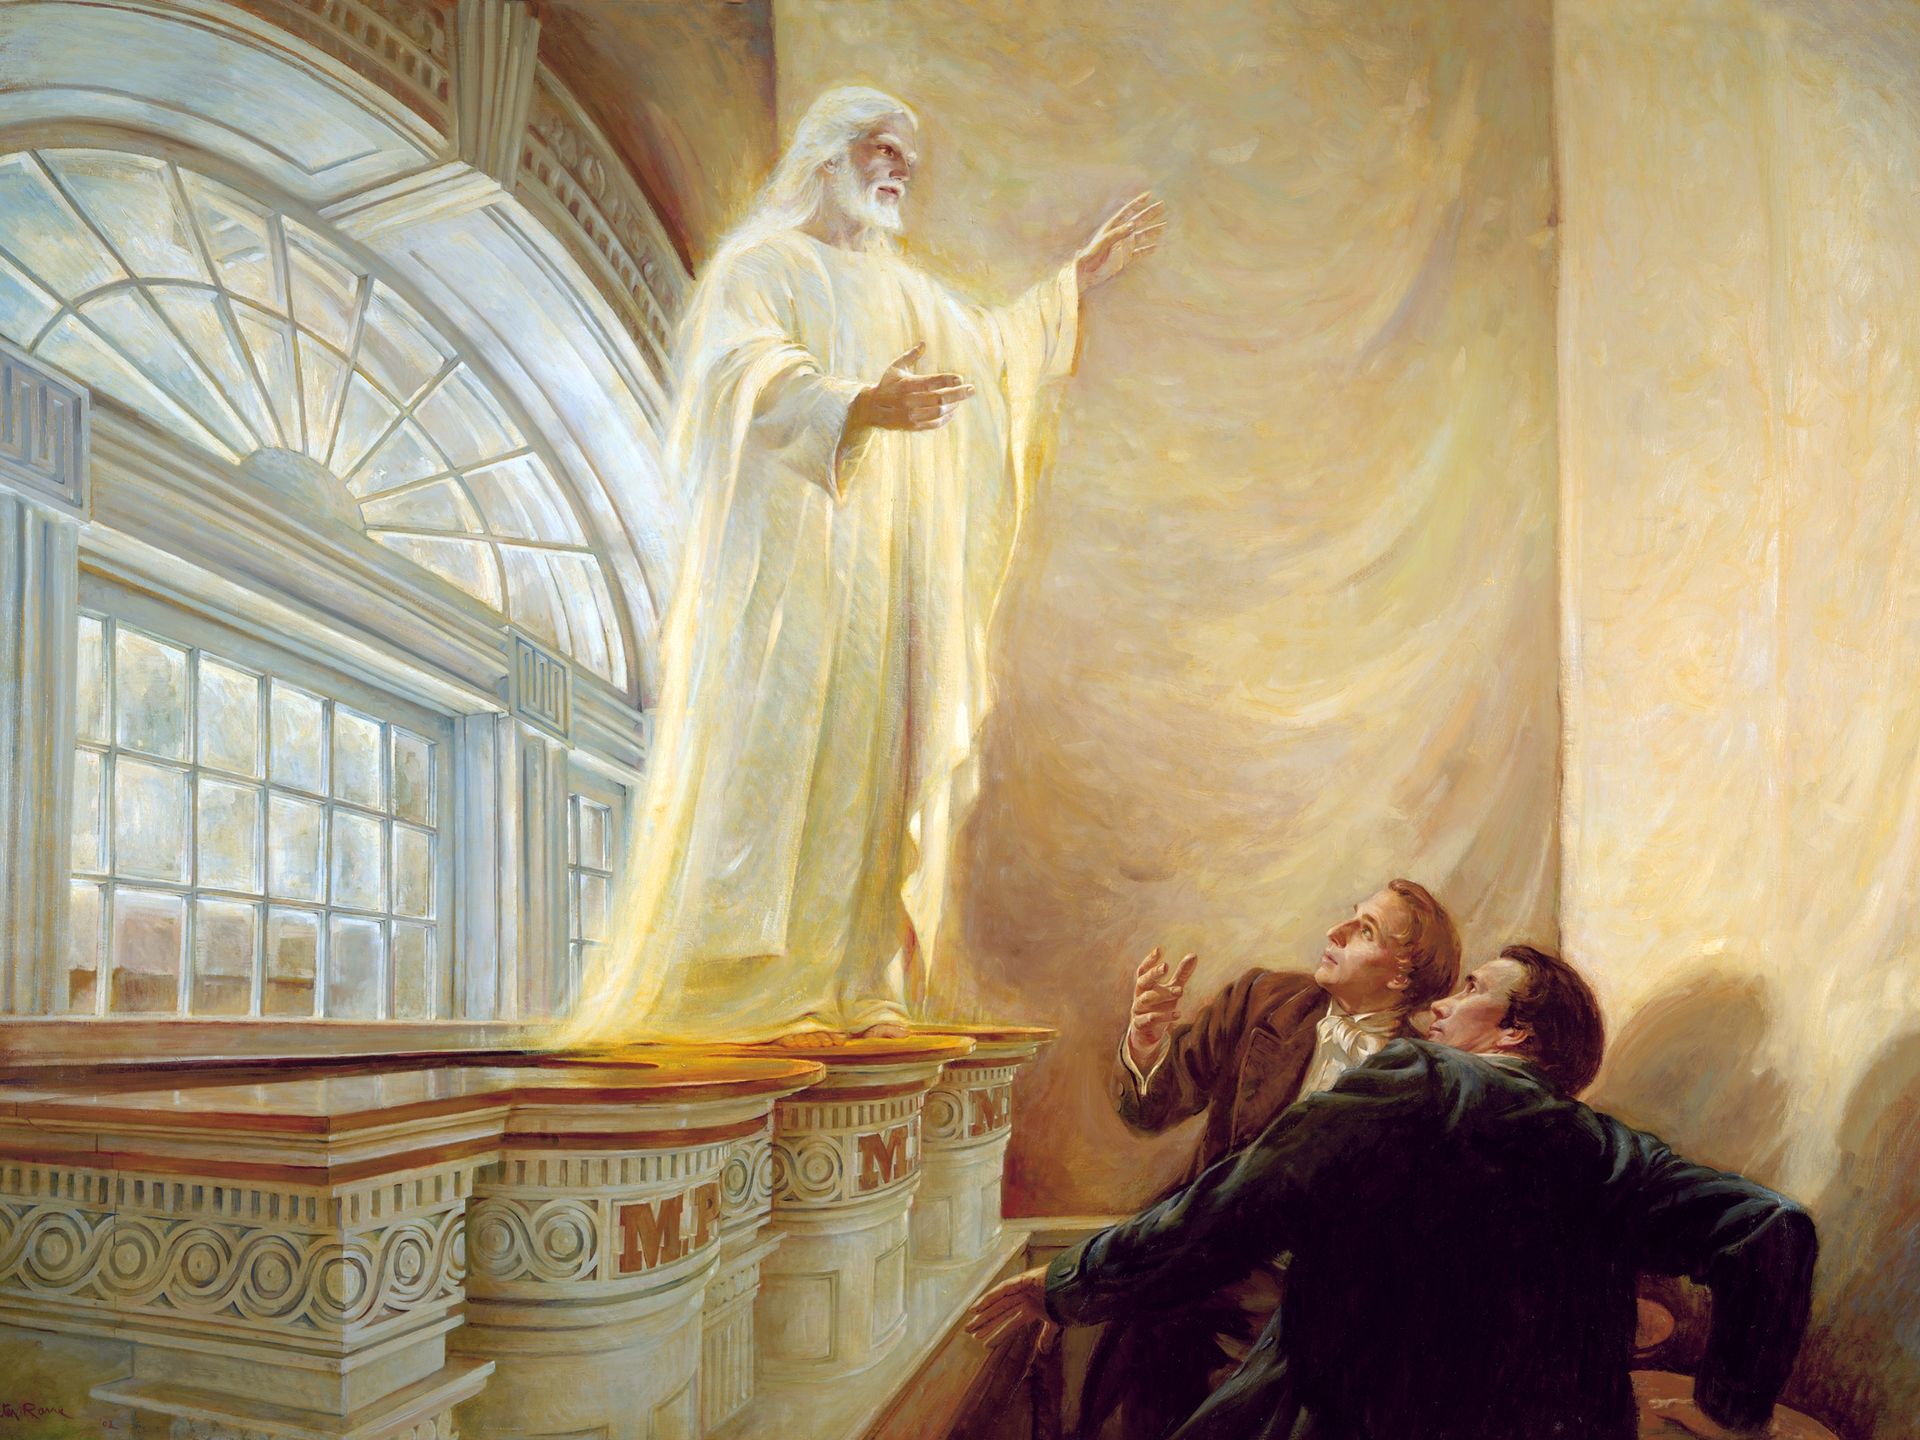 "Christ Appears in Kirtland Temple," by Walter Rane